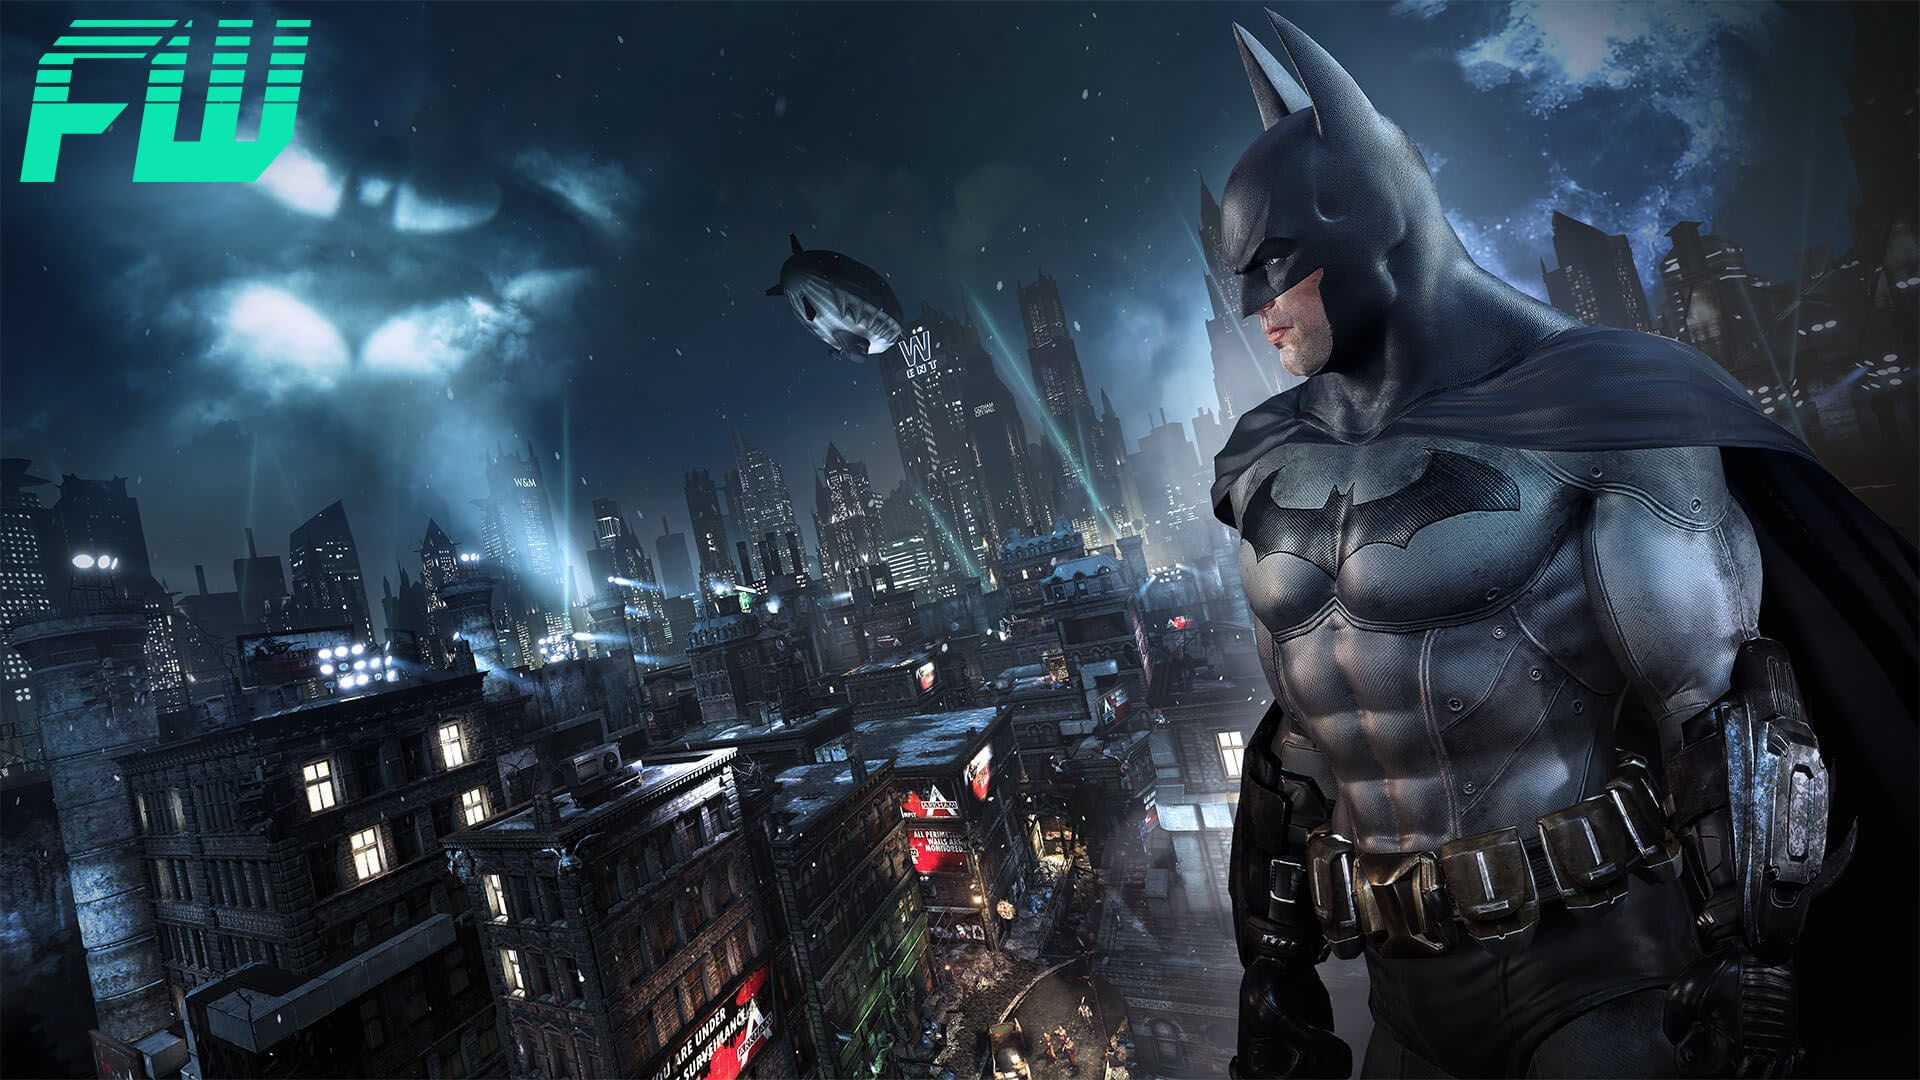 Batsuits We Want in the Next Arkham Game